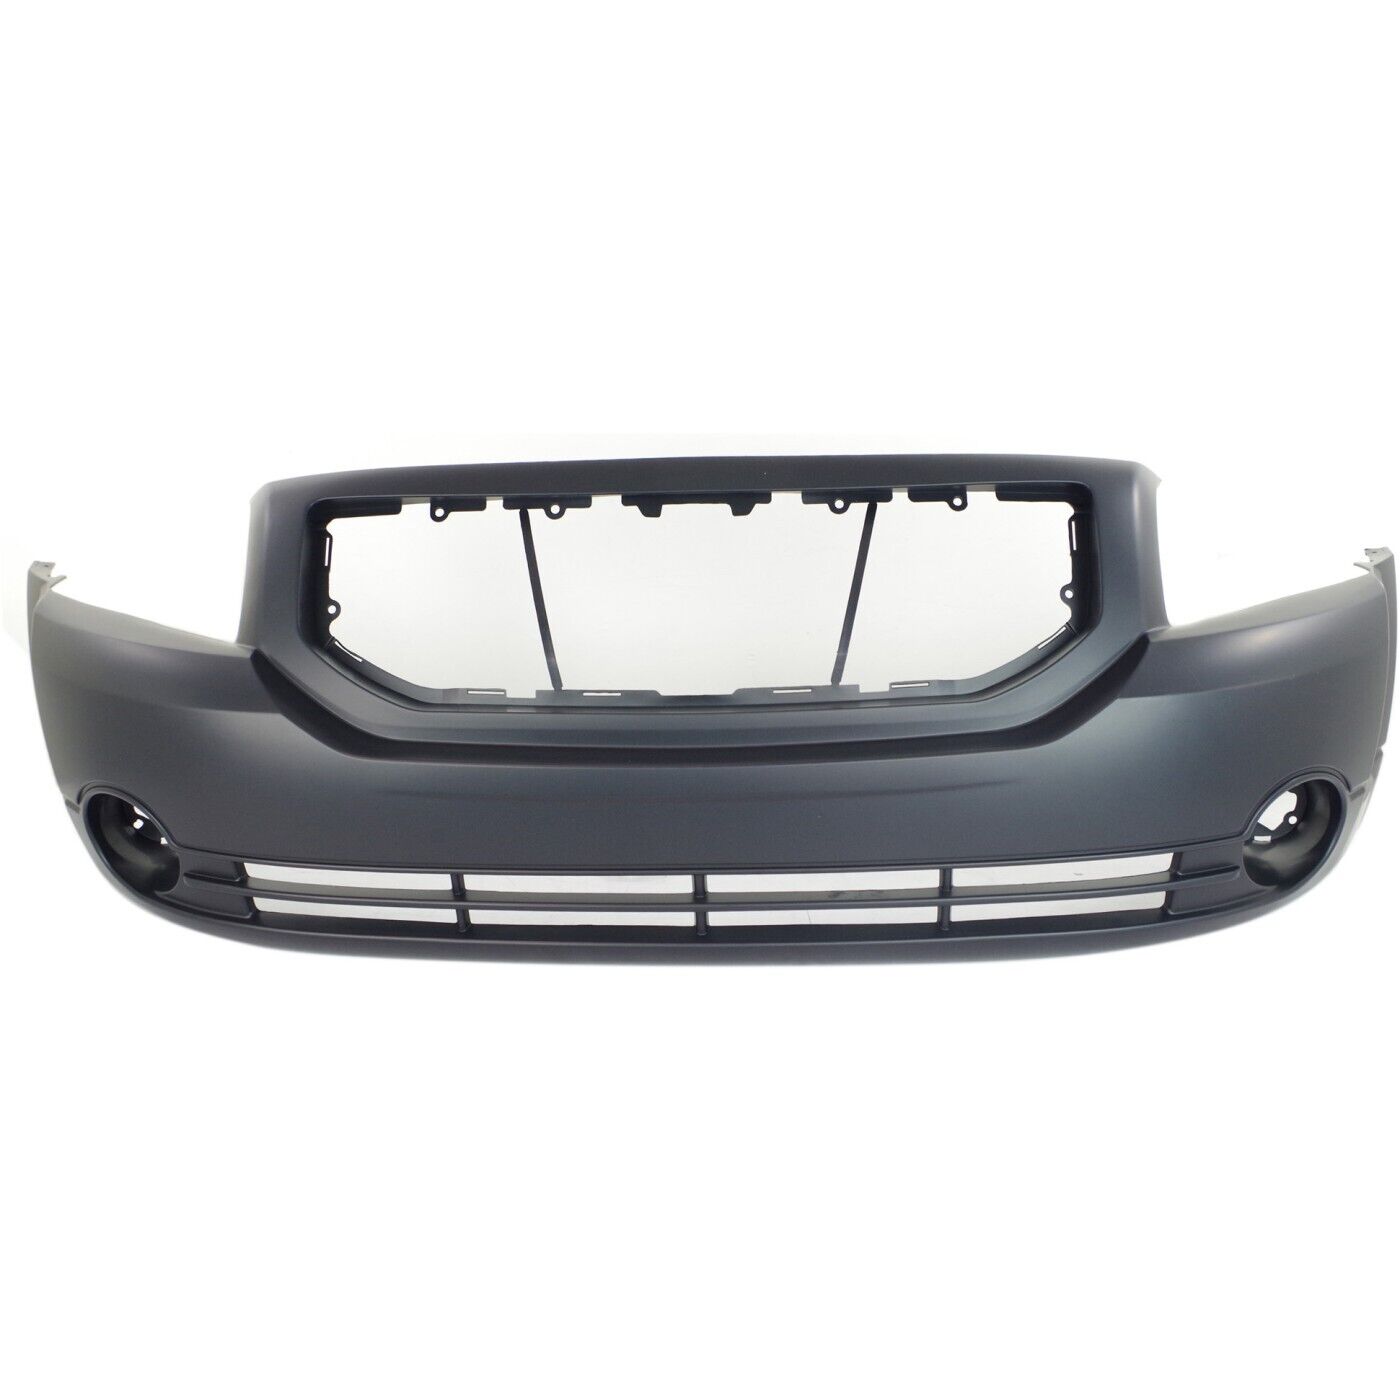 Front Bumper Cover For 2007-2012 Dodge Caliber with Fog Lamp Holes 5183394AE